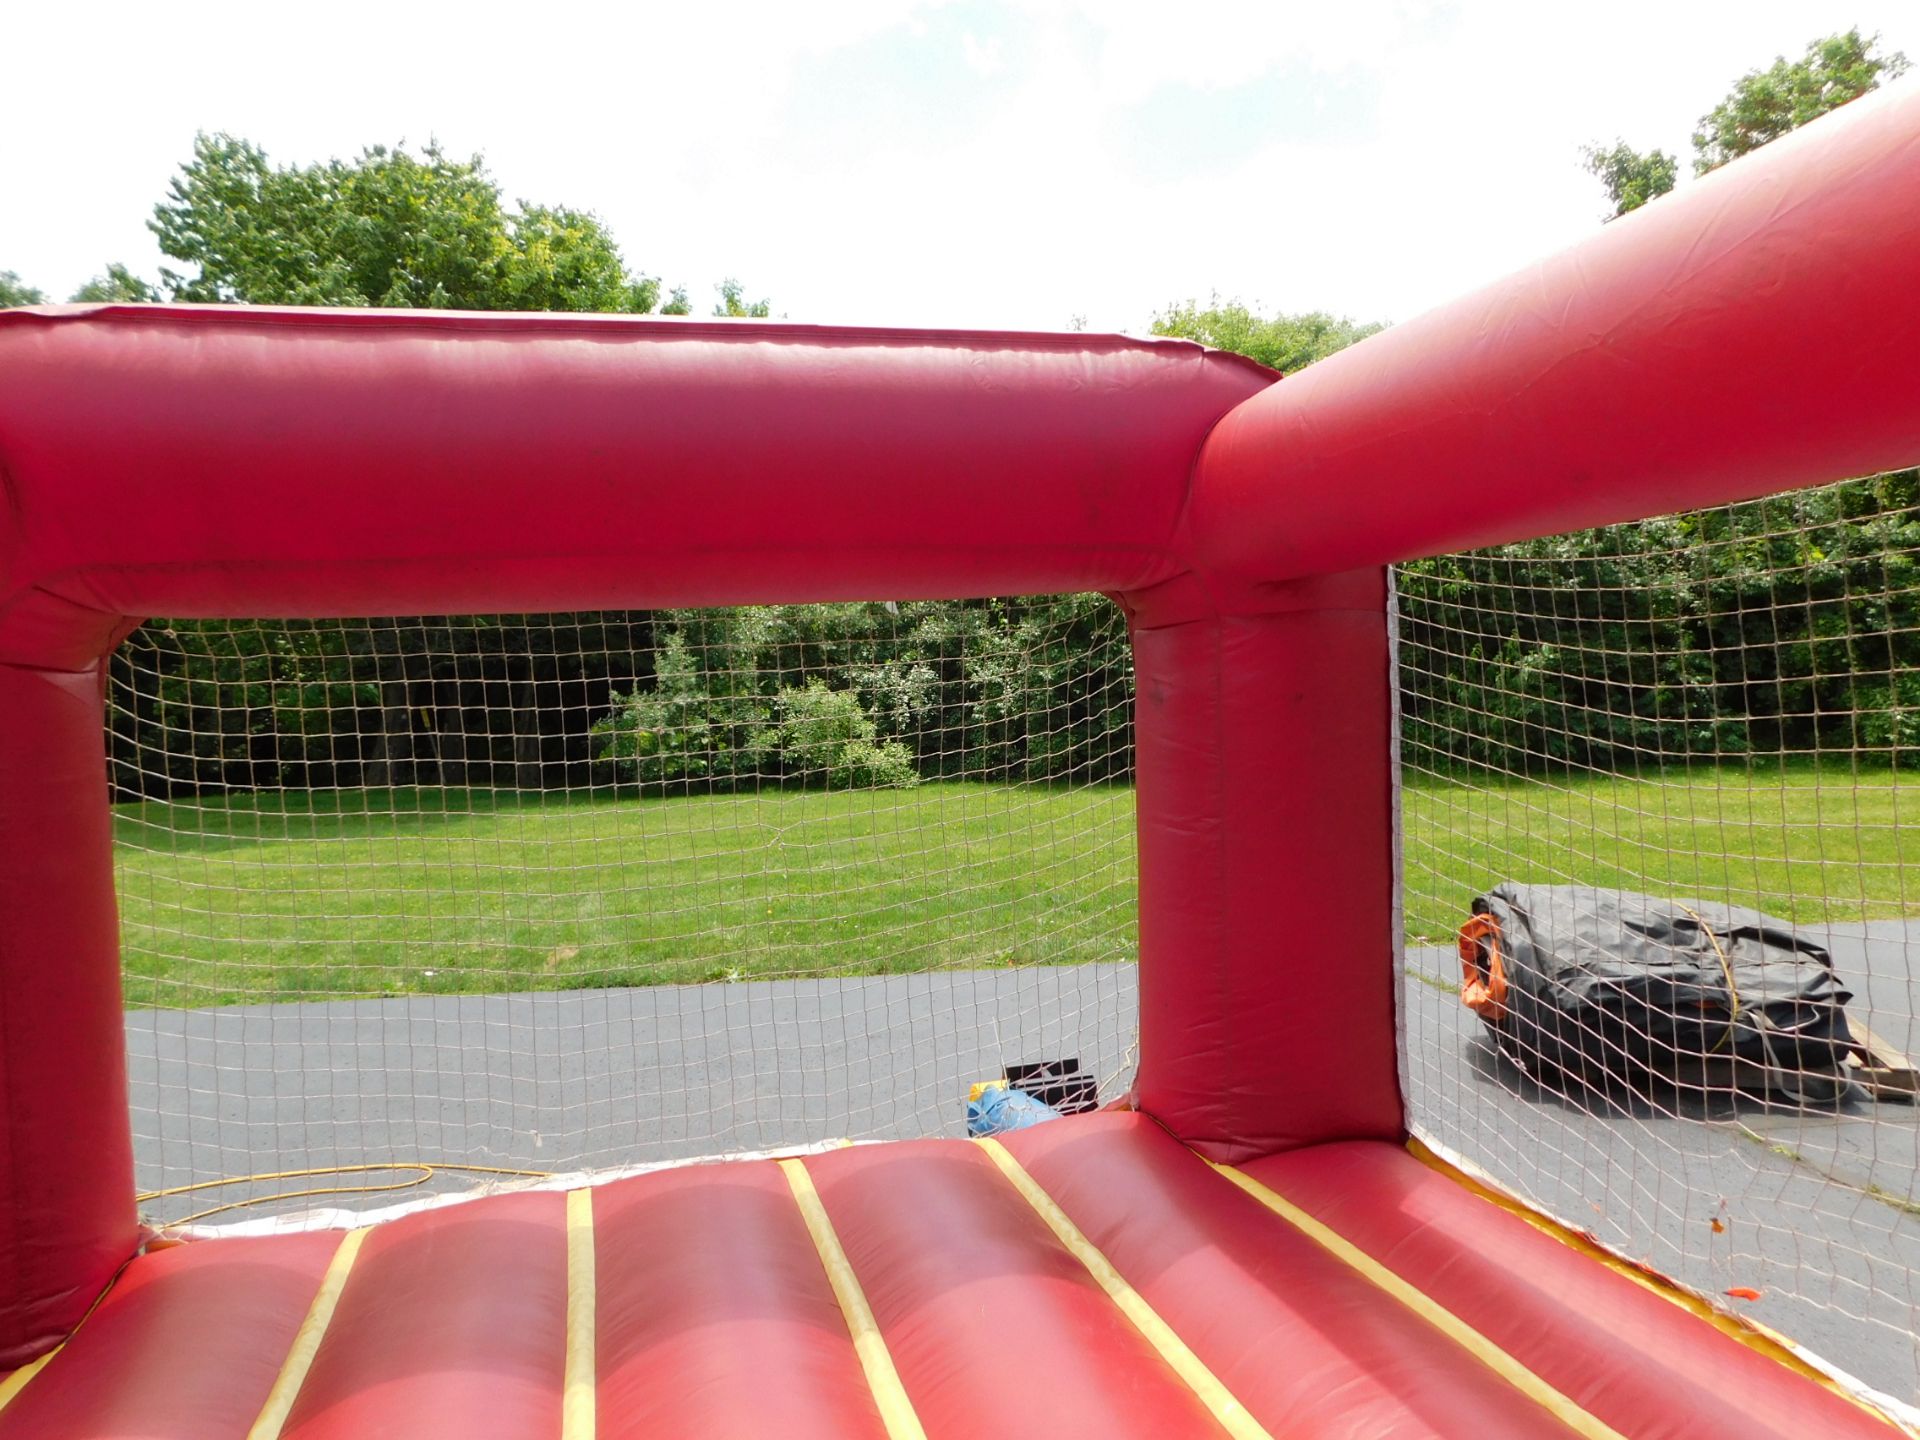 Inflatable Fun Service Bounce House, 1pc. 1 Blower required, Junior Jumper 11'WX11'LX9'H #104 - Image 10 of 12